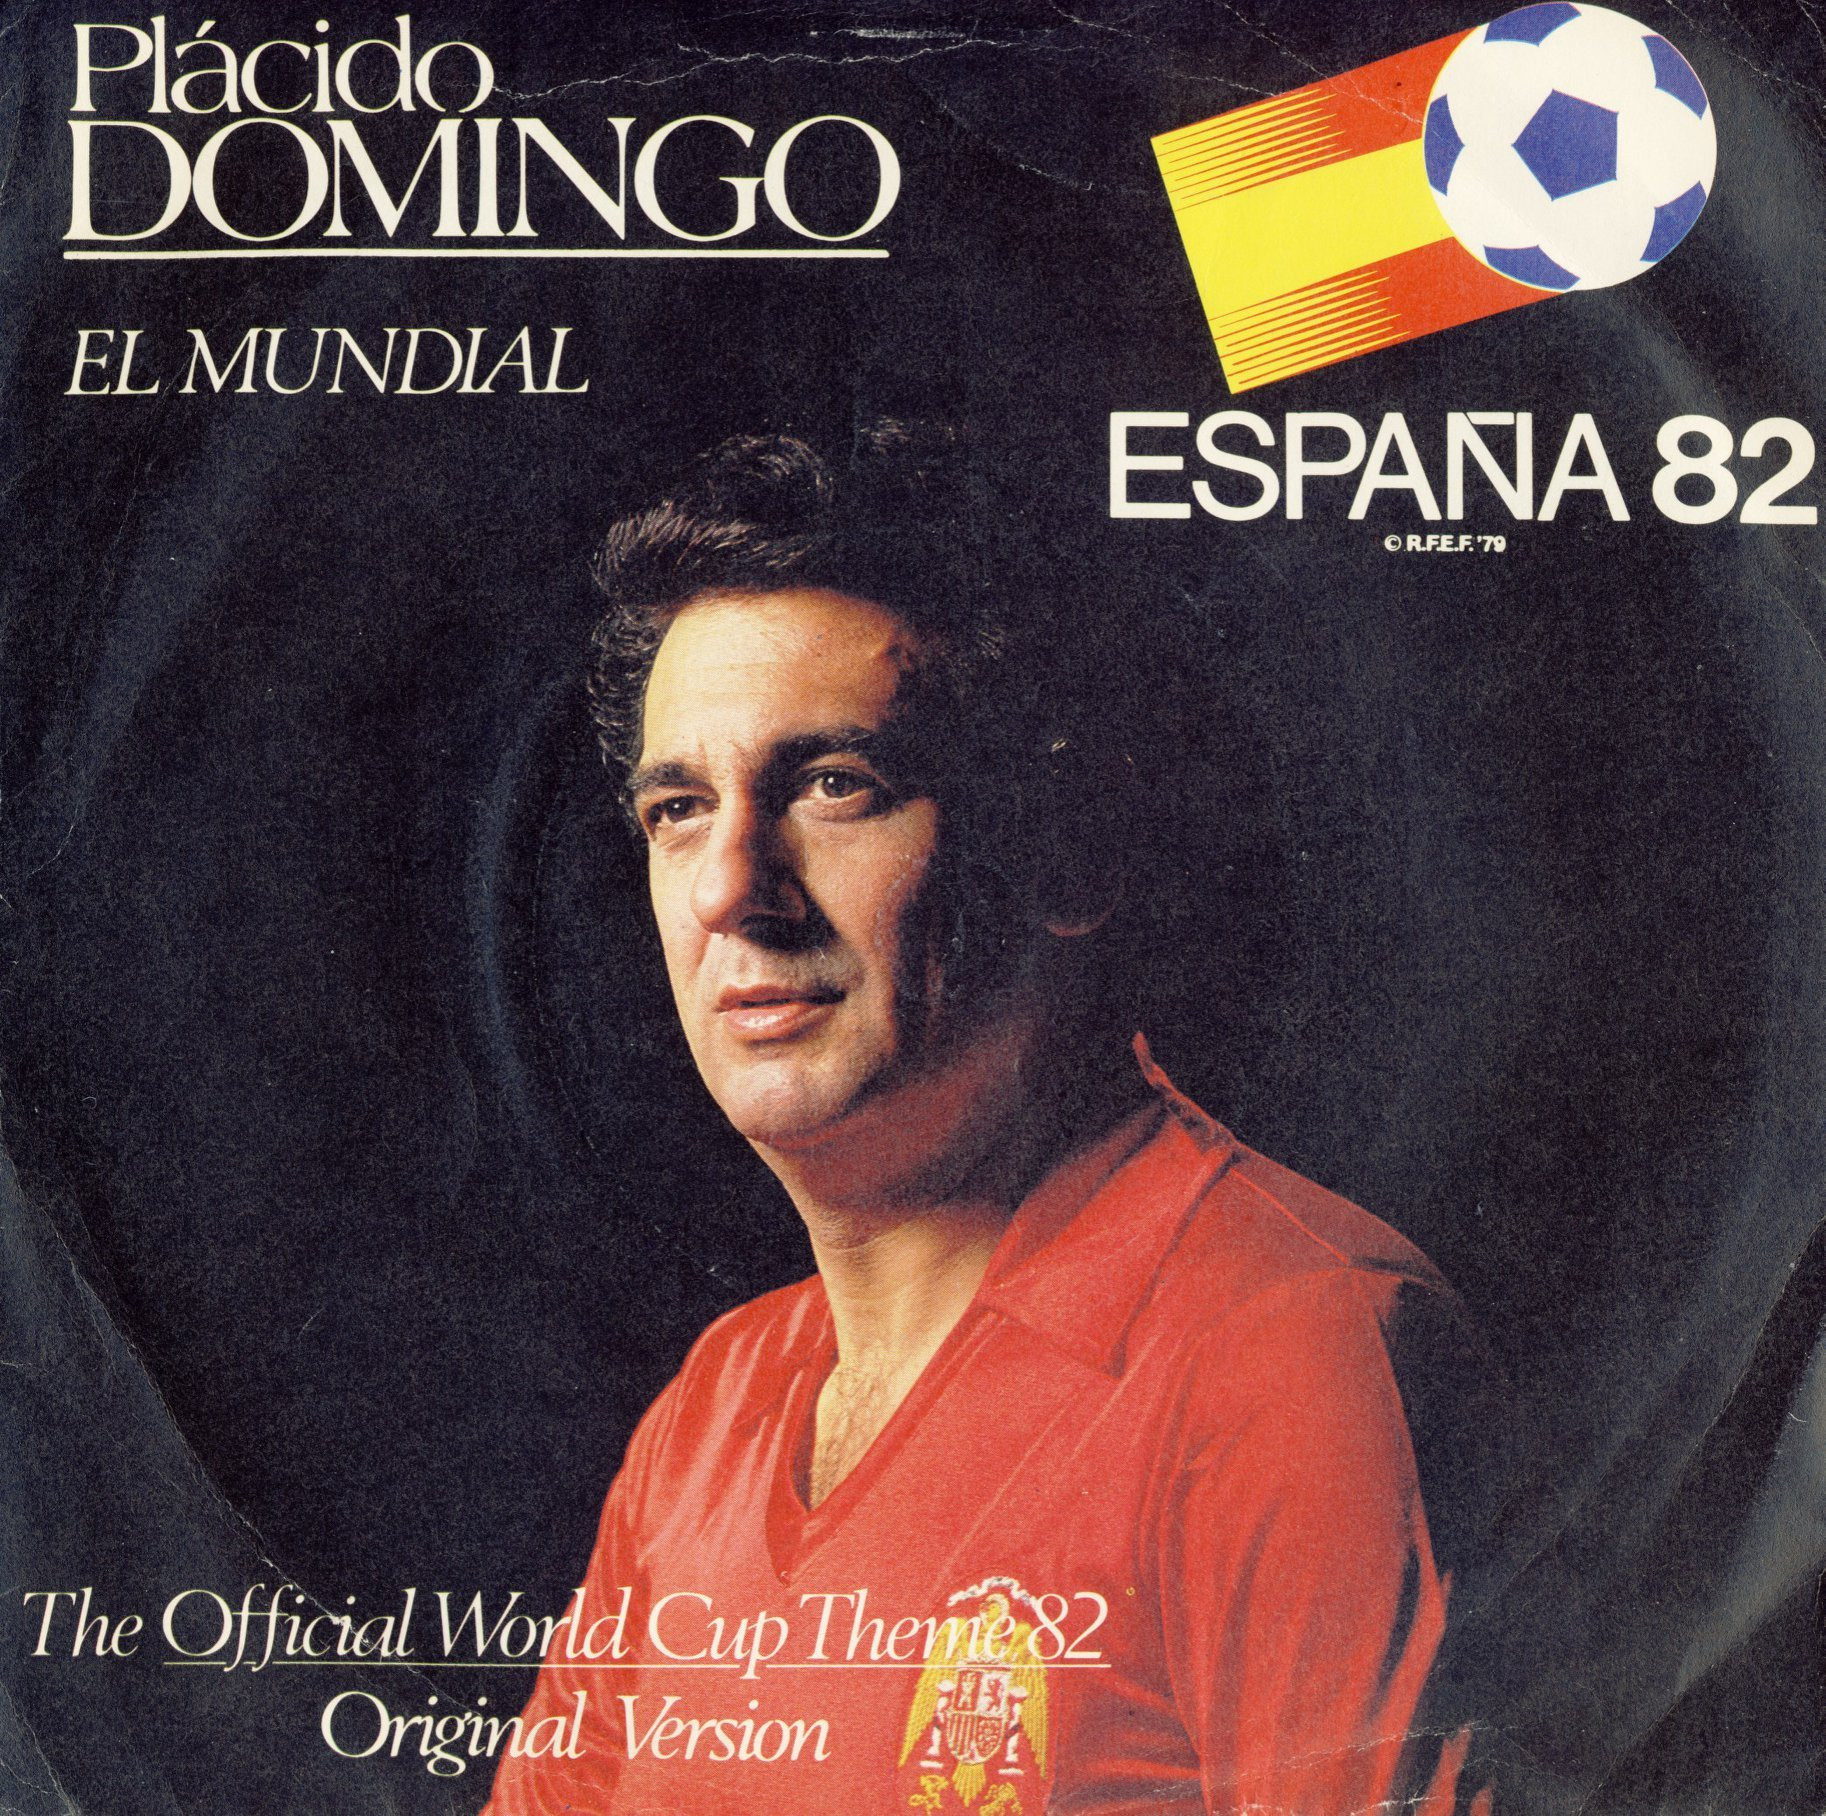 Placido Domingo wore a Spanish team shirt to promote the 1982 World Cup's official song  ©Polydor records